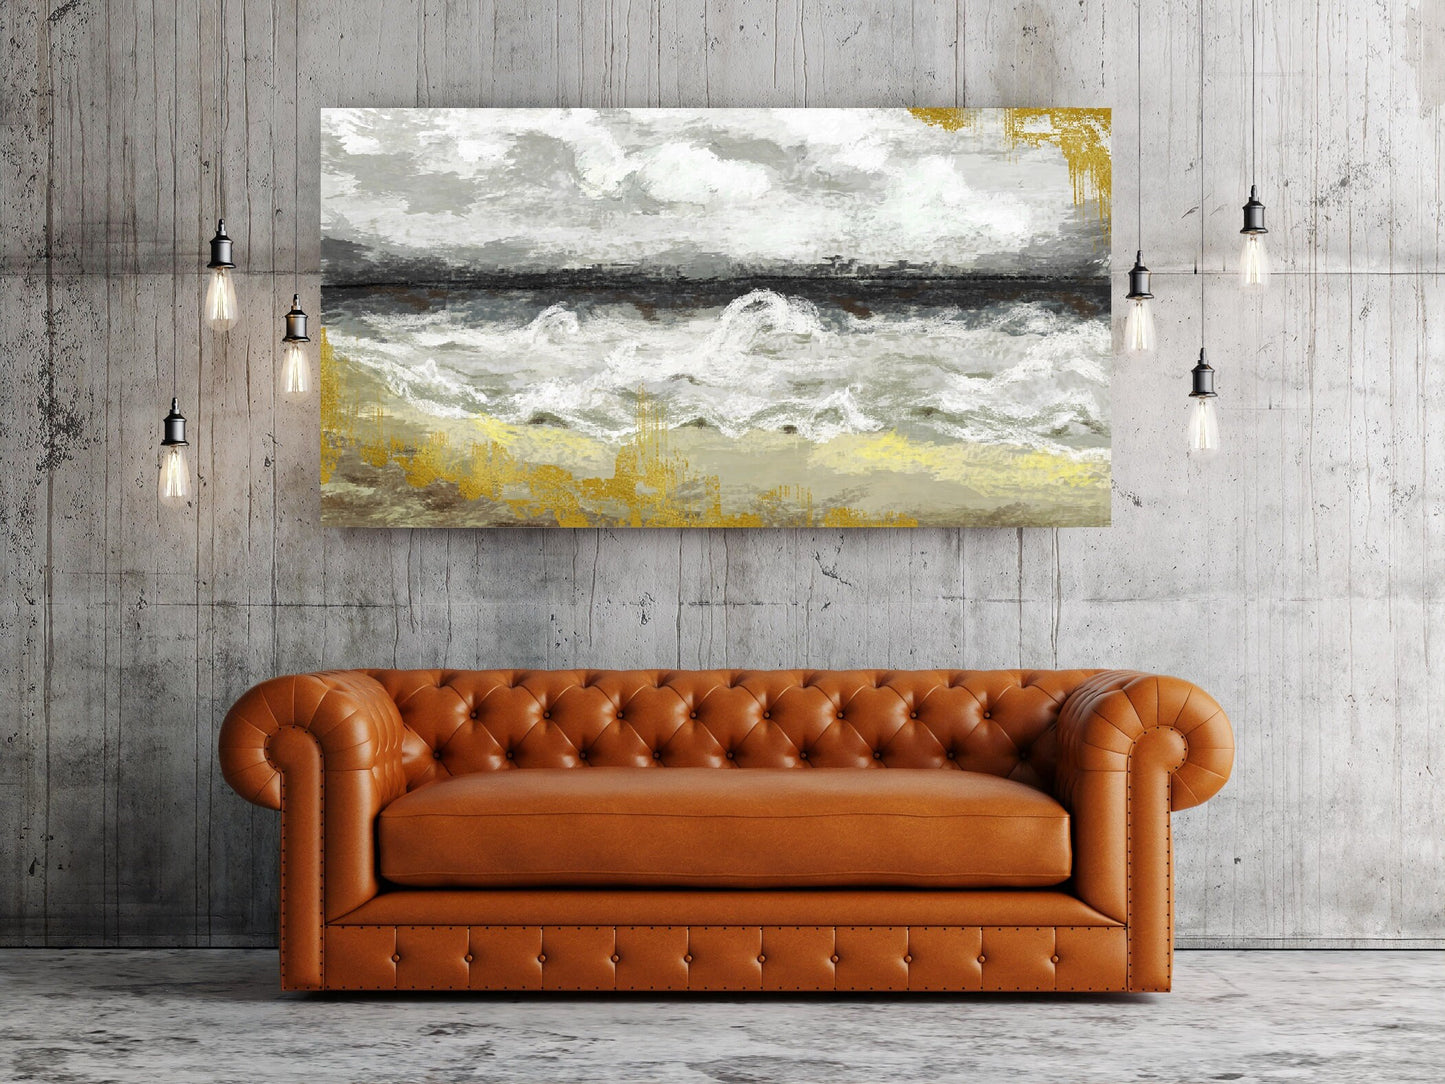 Abstract canvas wall art, extra large floating frame canvas print, waves hanging wall artwork, printable marine wall art, bedroom artwork